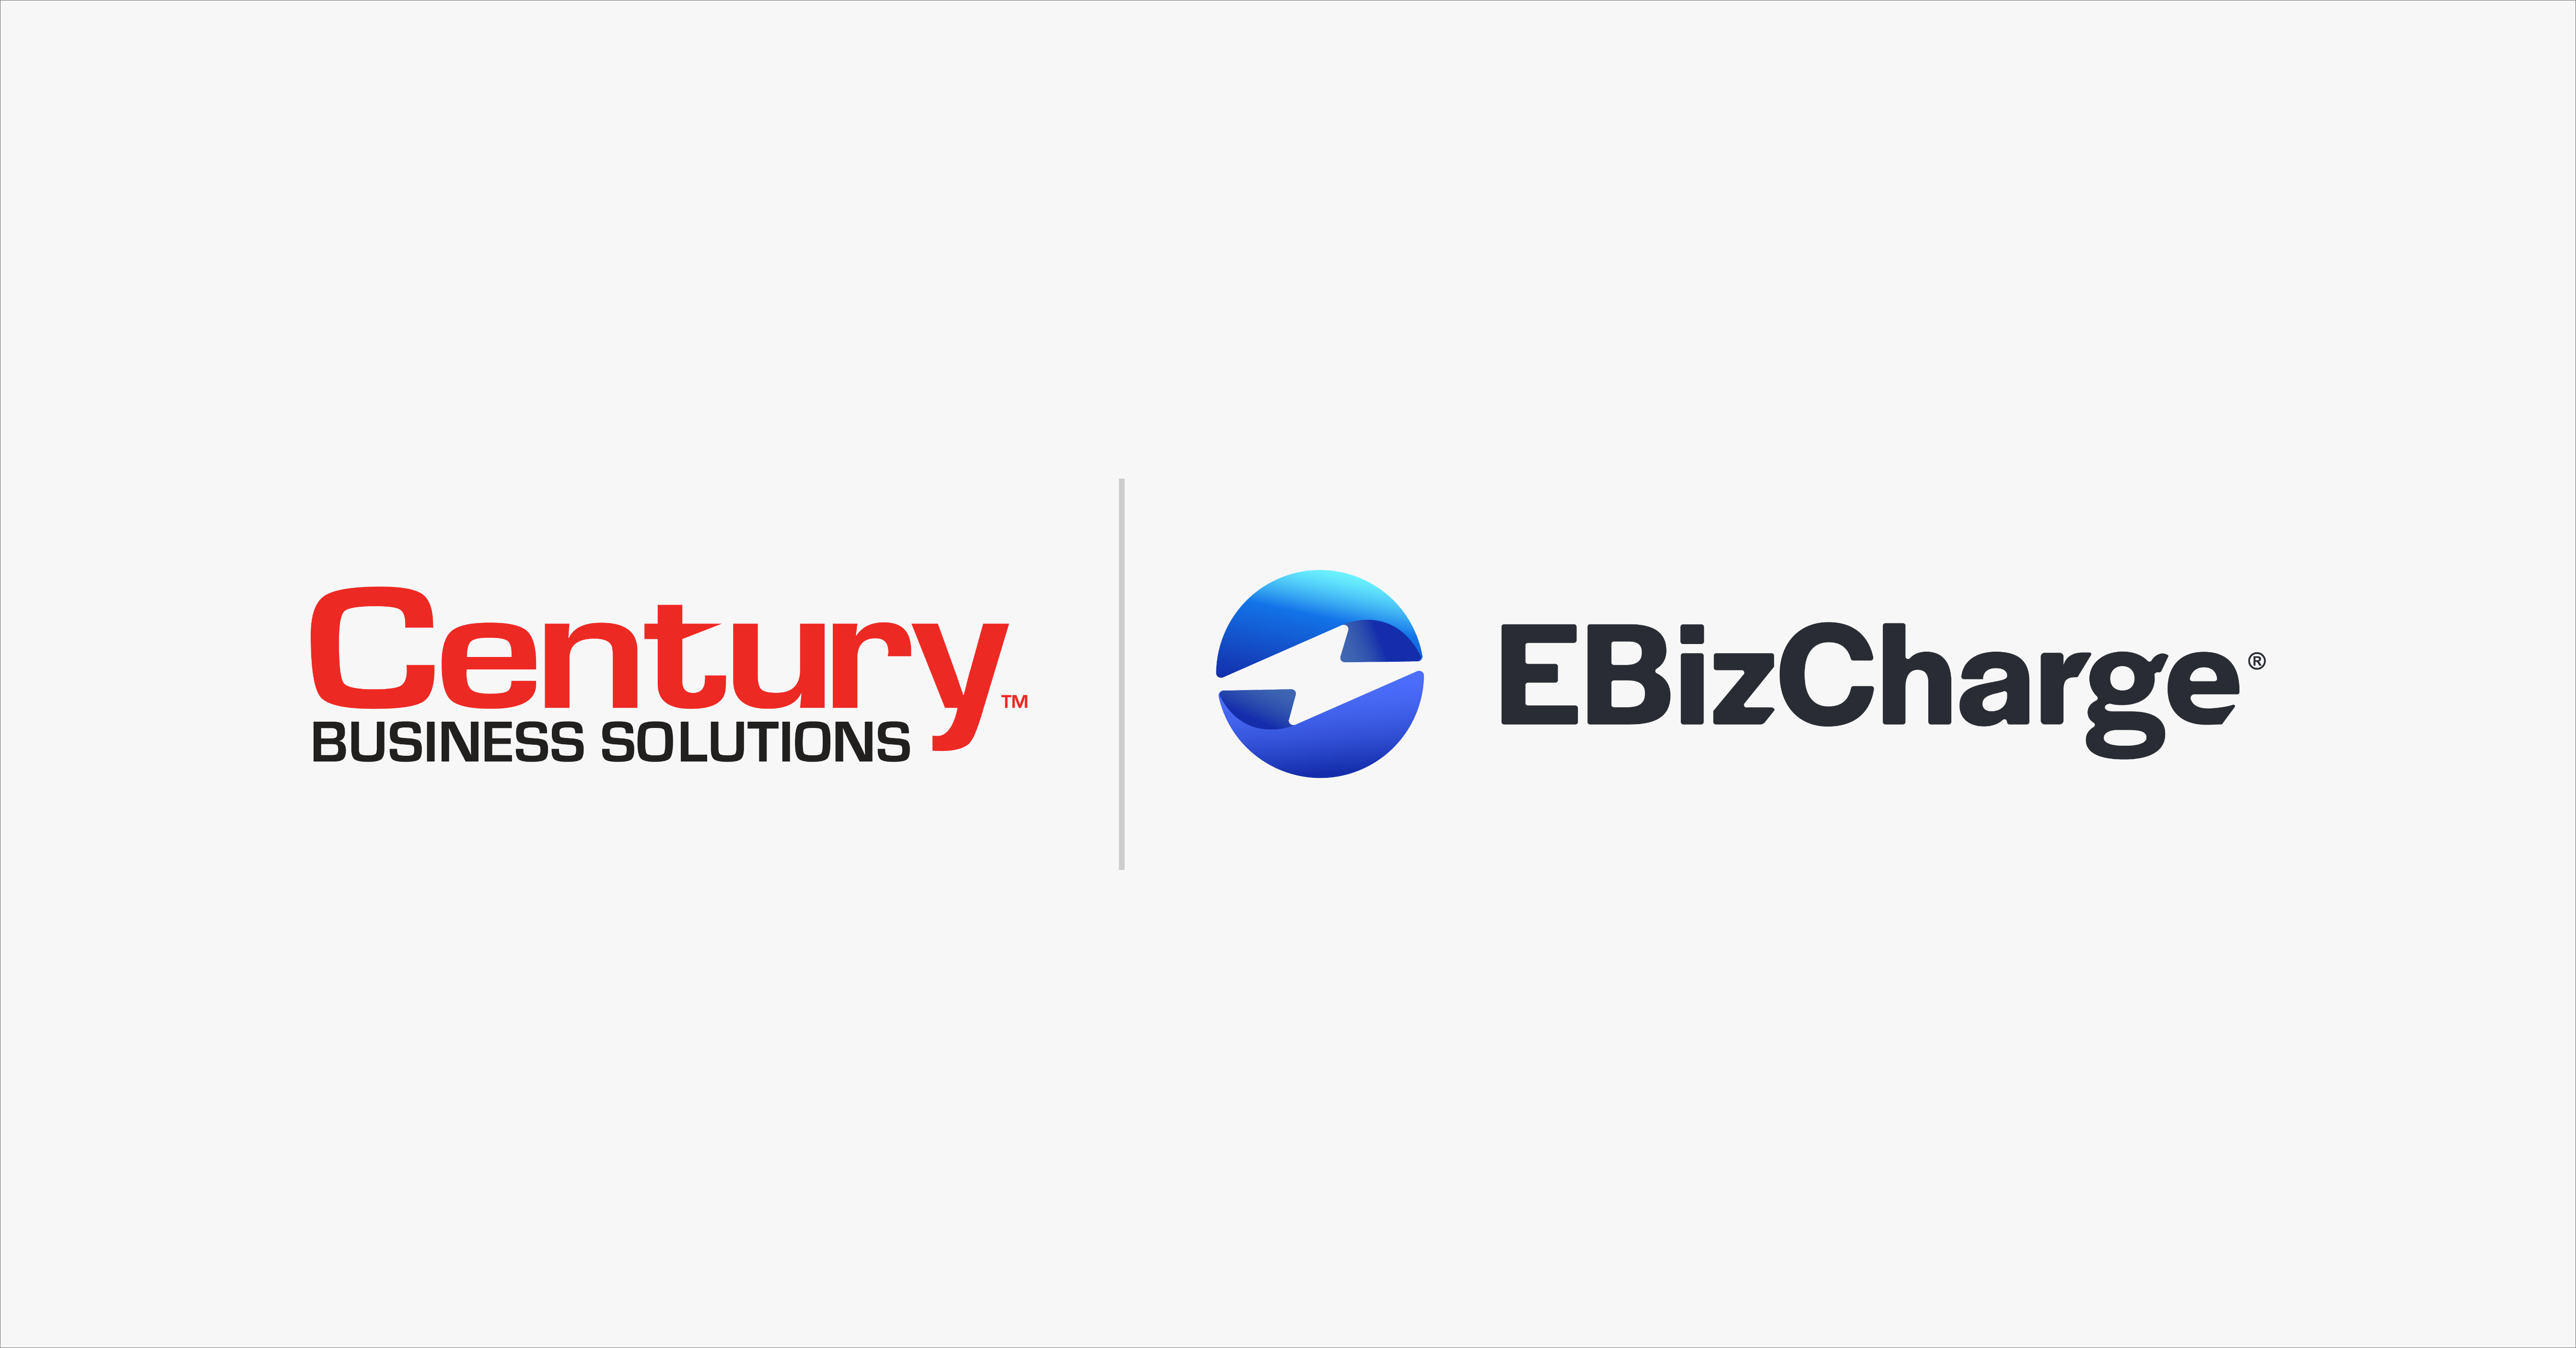 You are currently viewing EBizCharge – the New Face of Century Business Solutions.